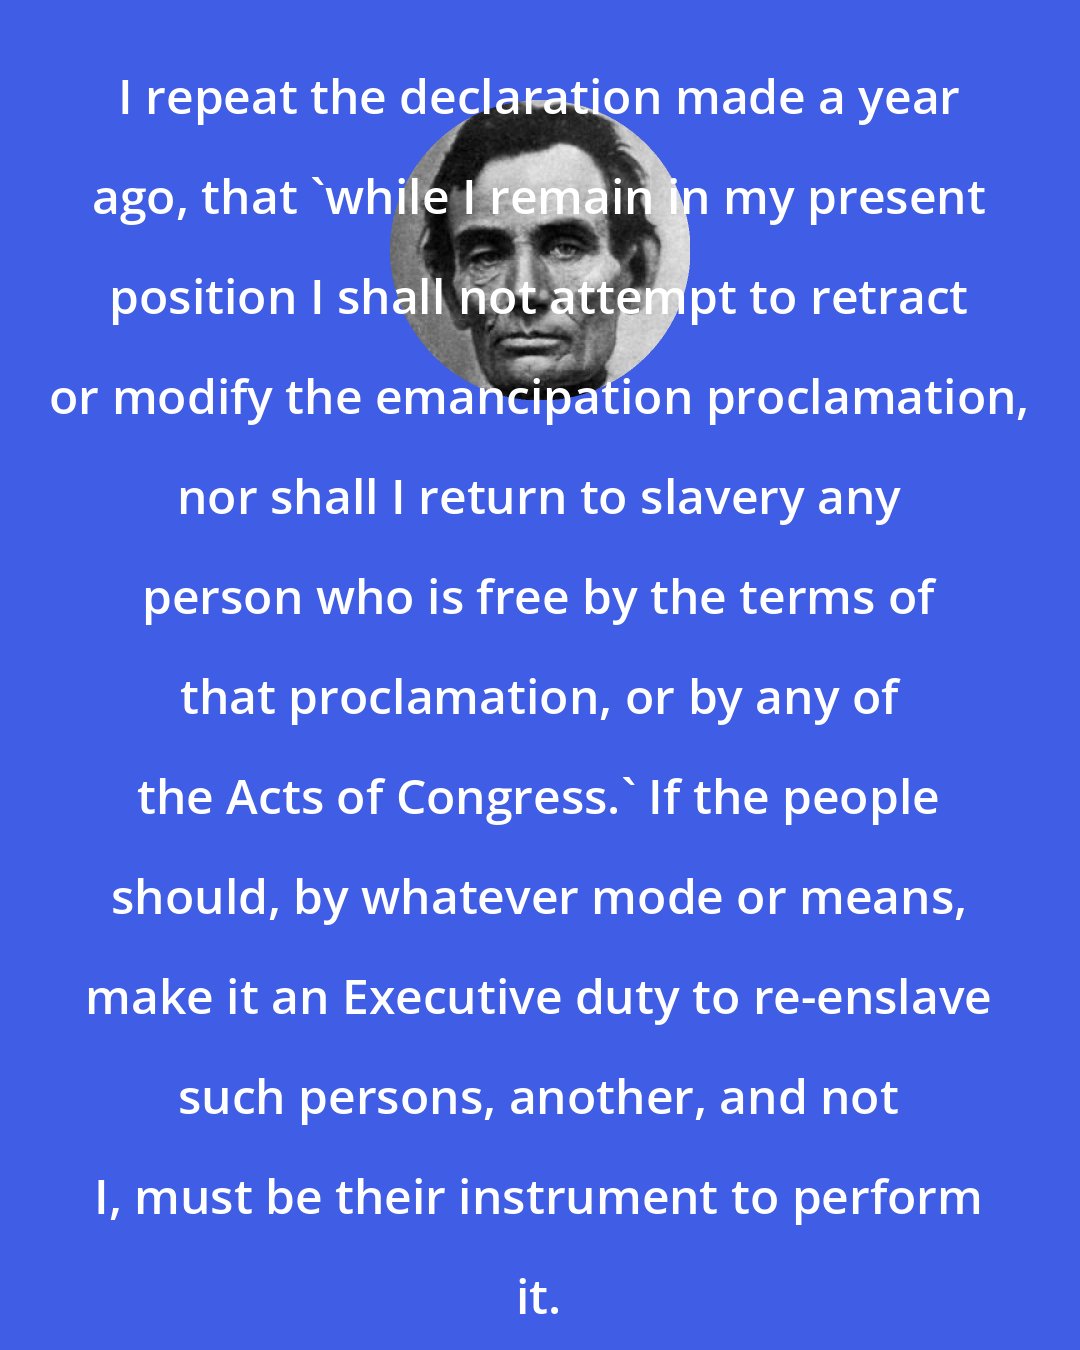 Abraham Lincoln: I repeat the declaration made a year ago, that 'while I remain in my present position I shall not attempt to retract or modify the emancipation proclamation, nor shall I return to slavery any person who is free by the terms of that proclamation, or by any of the Acts of Congress.' If the people should, by whatever mode or means, make it an Executive duty to re-enslave such persons, another, and not I, must be their instrument to perform it.